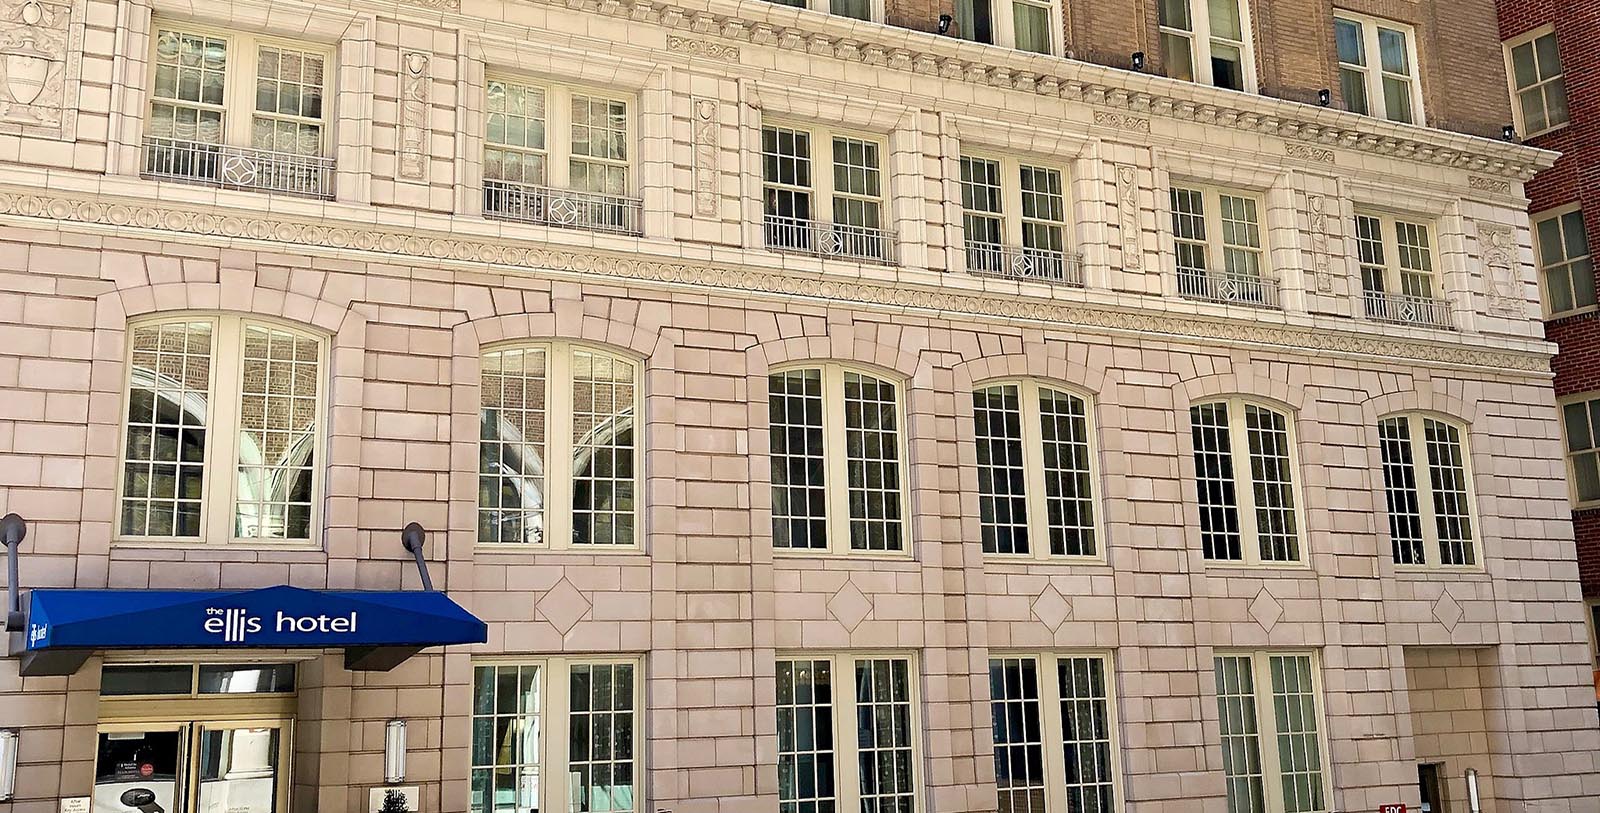 Discover how the hotel’s restored façade now appears much as it did when originally built in 1913.